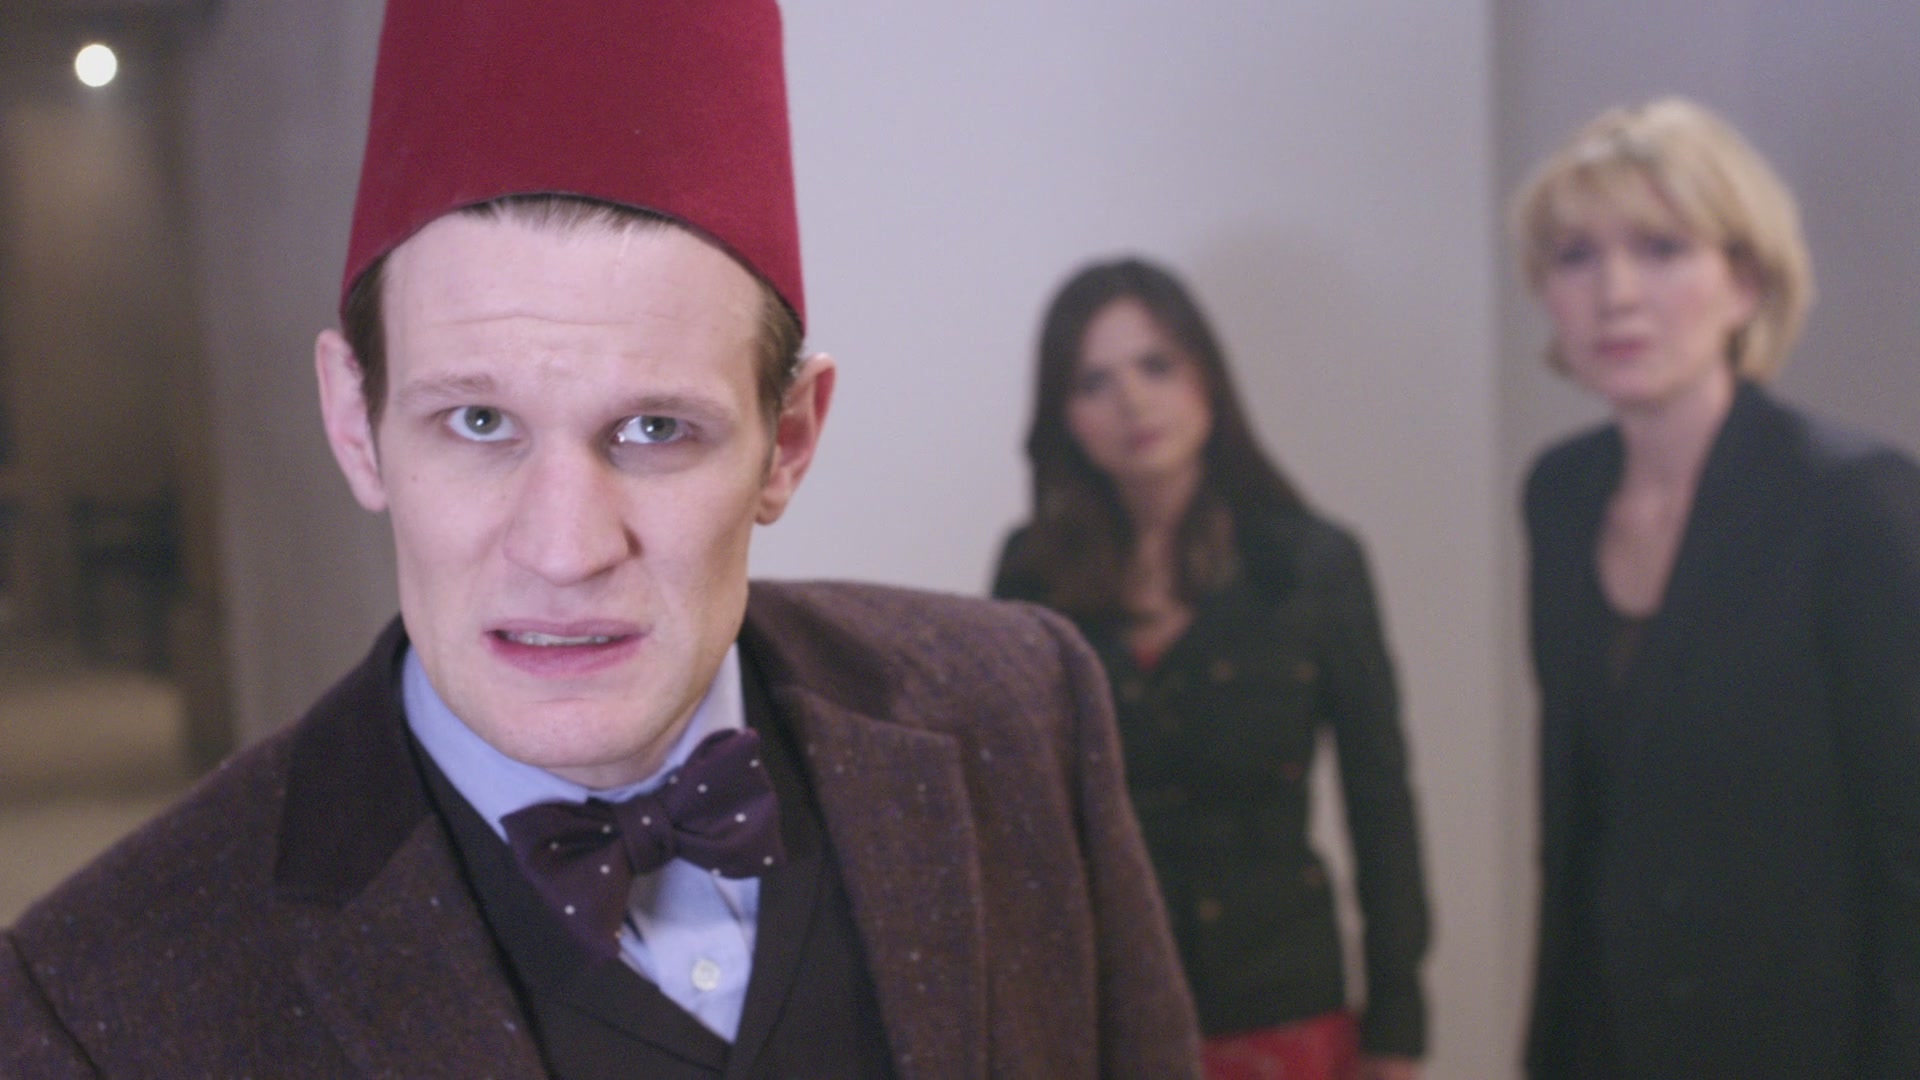 DayOfTheDoctor-Caps-0439.jpg